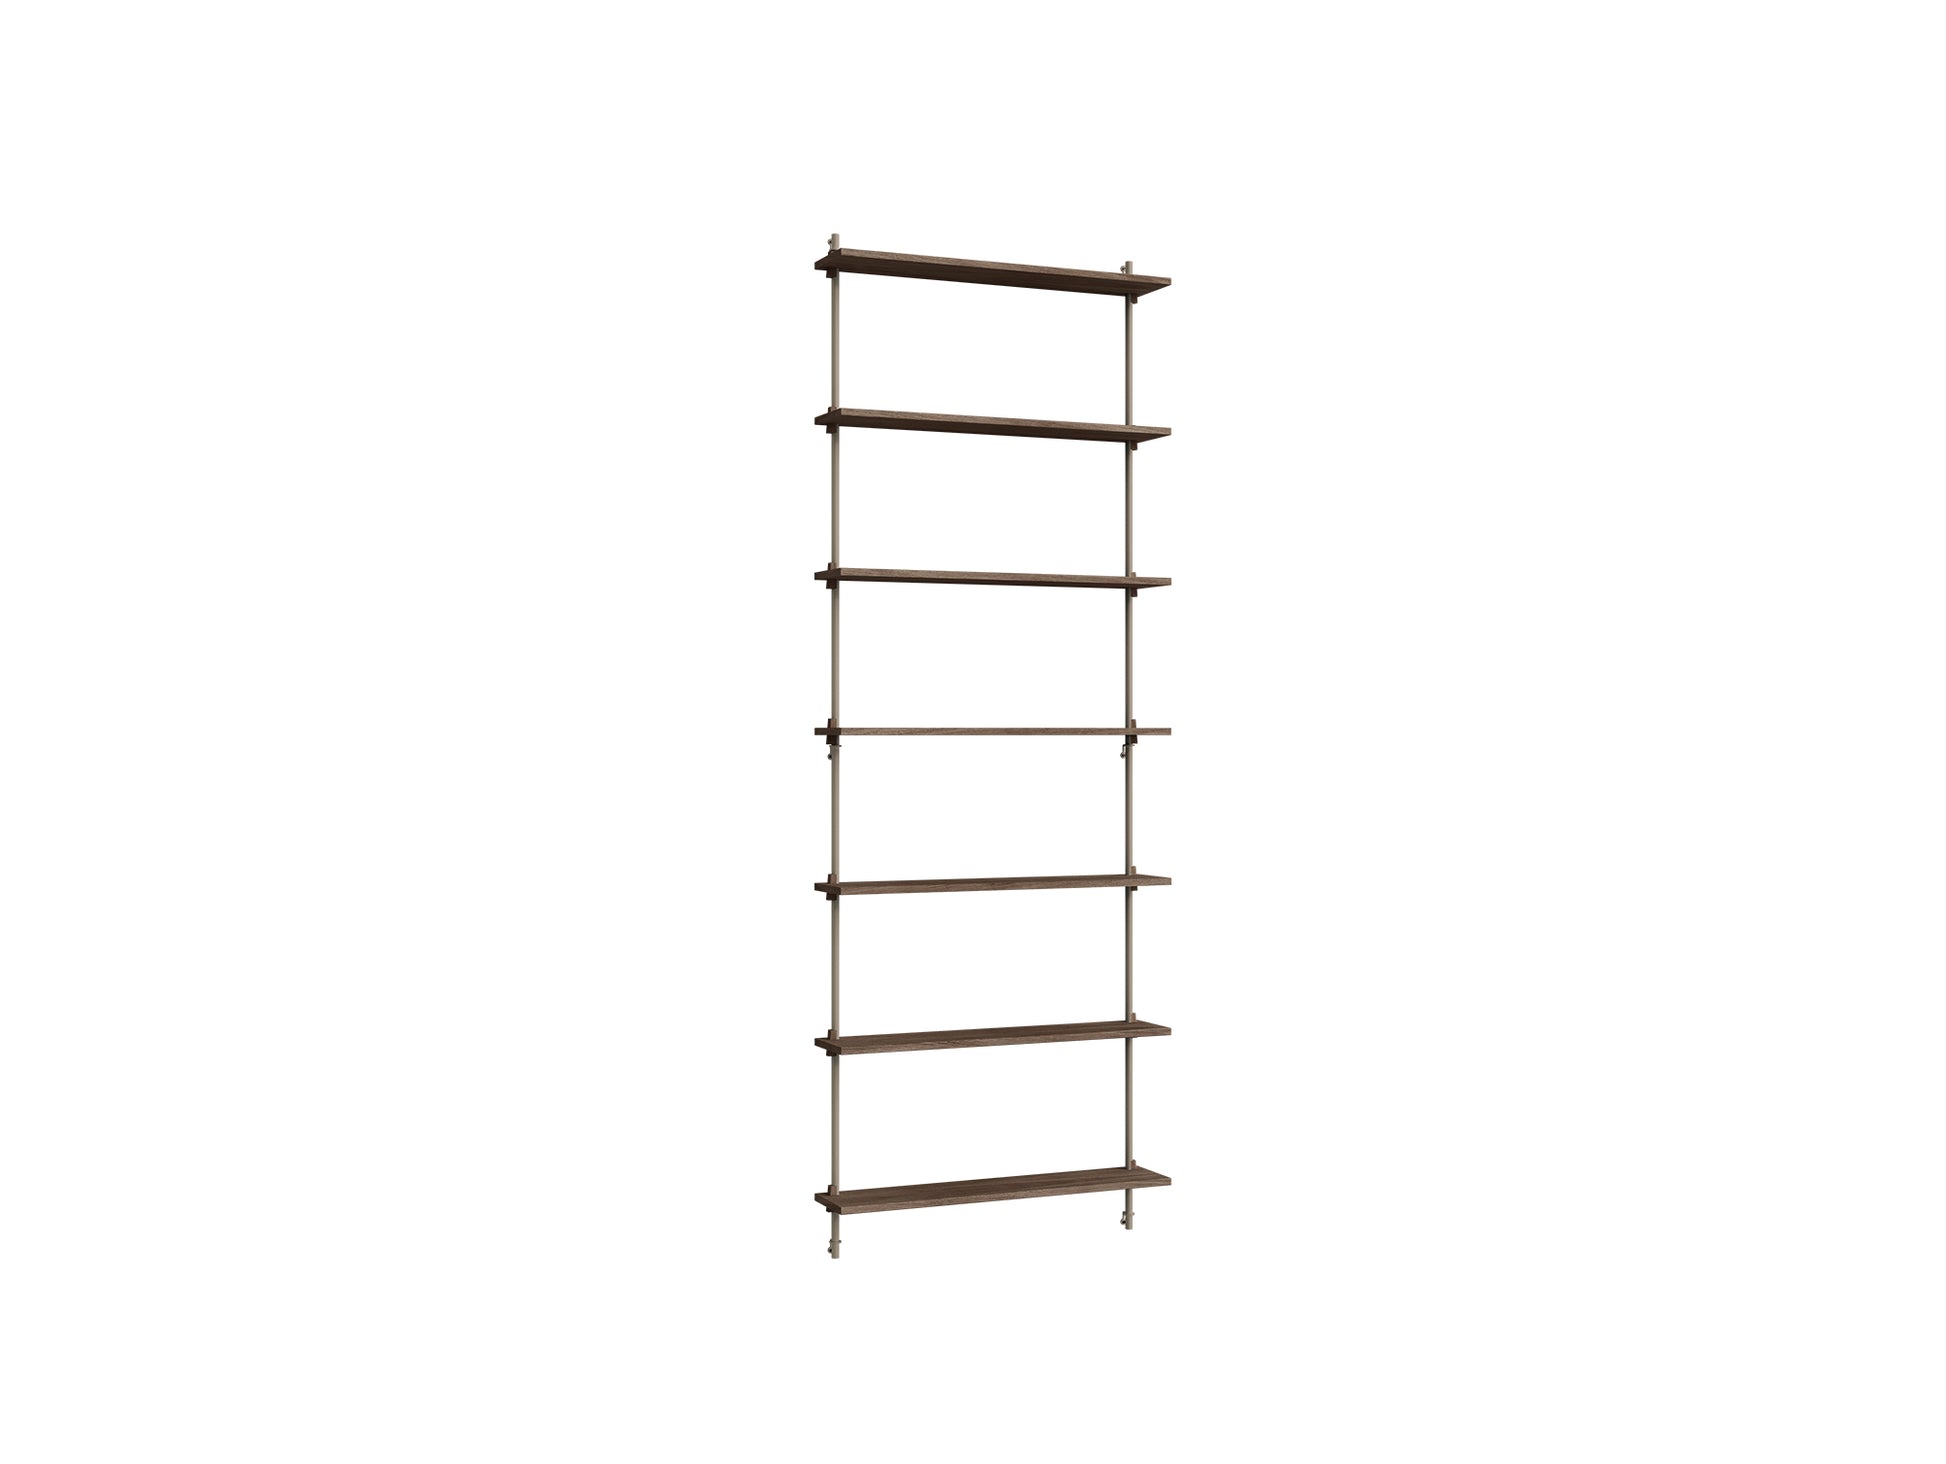 Wall Shelving System Sets (230 cm) by Moebe - WS.230.1 / Warm Grey Uprights / Smoked Oak